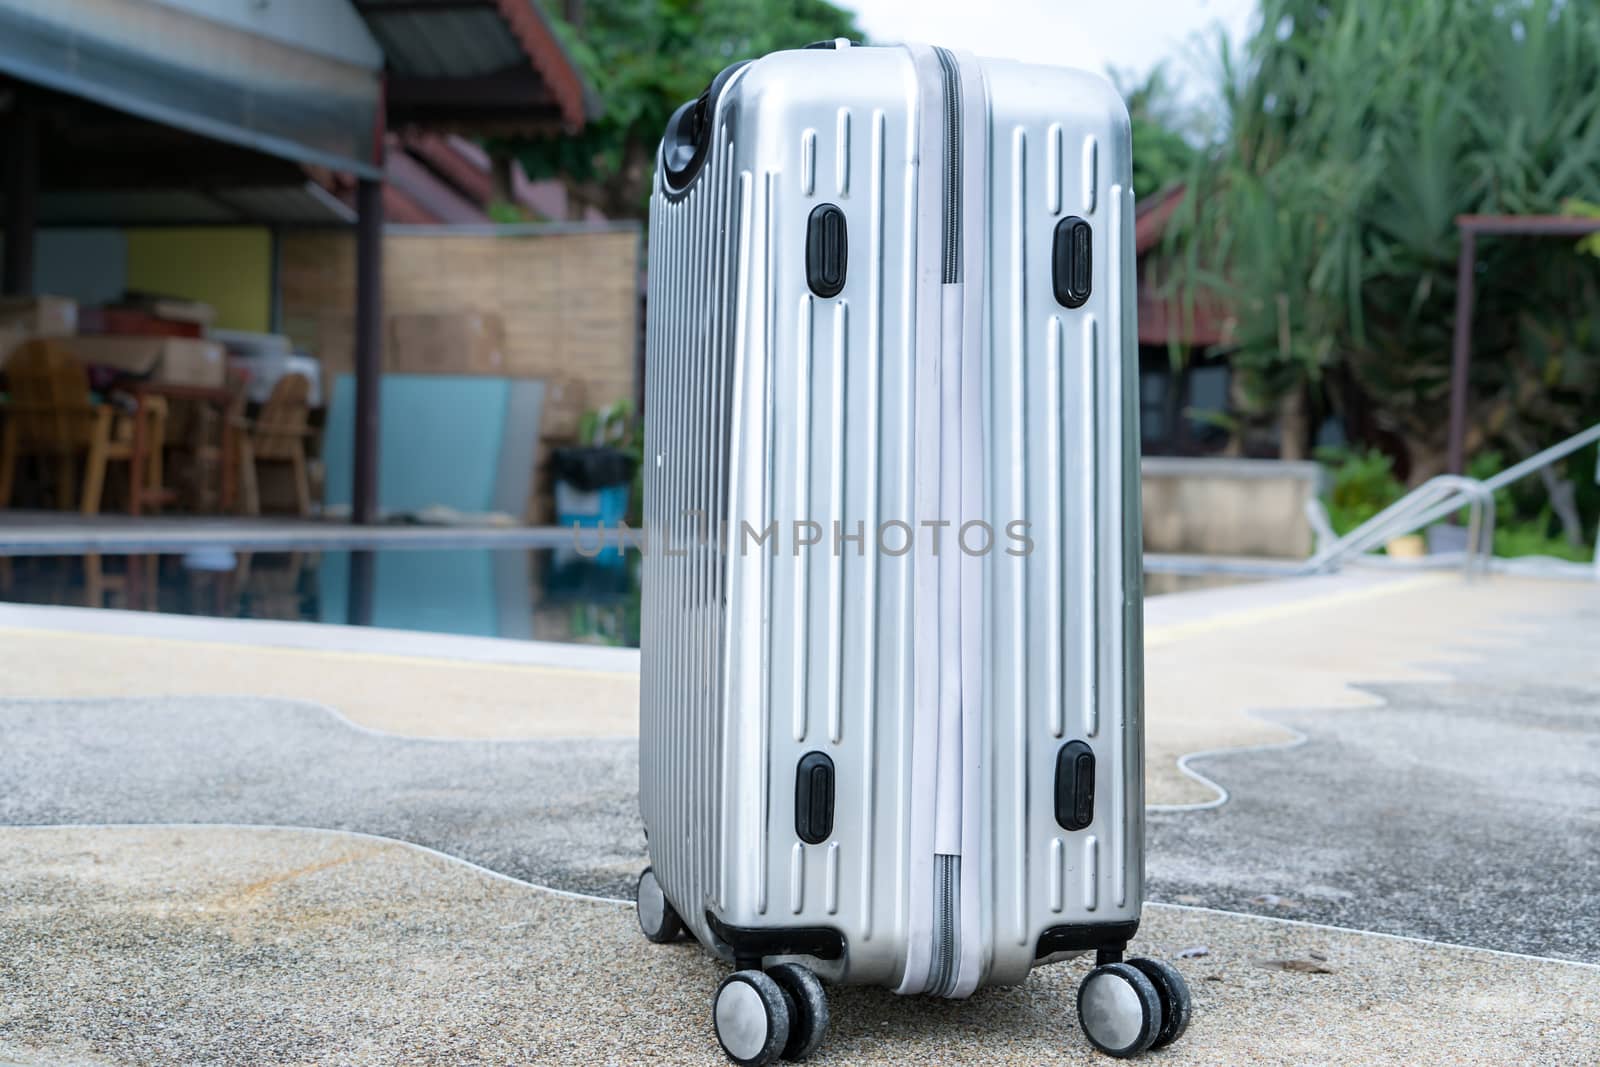 The silver travelling luggage is ready for summer beach and pool